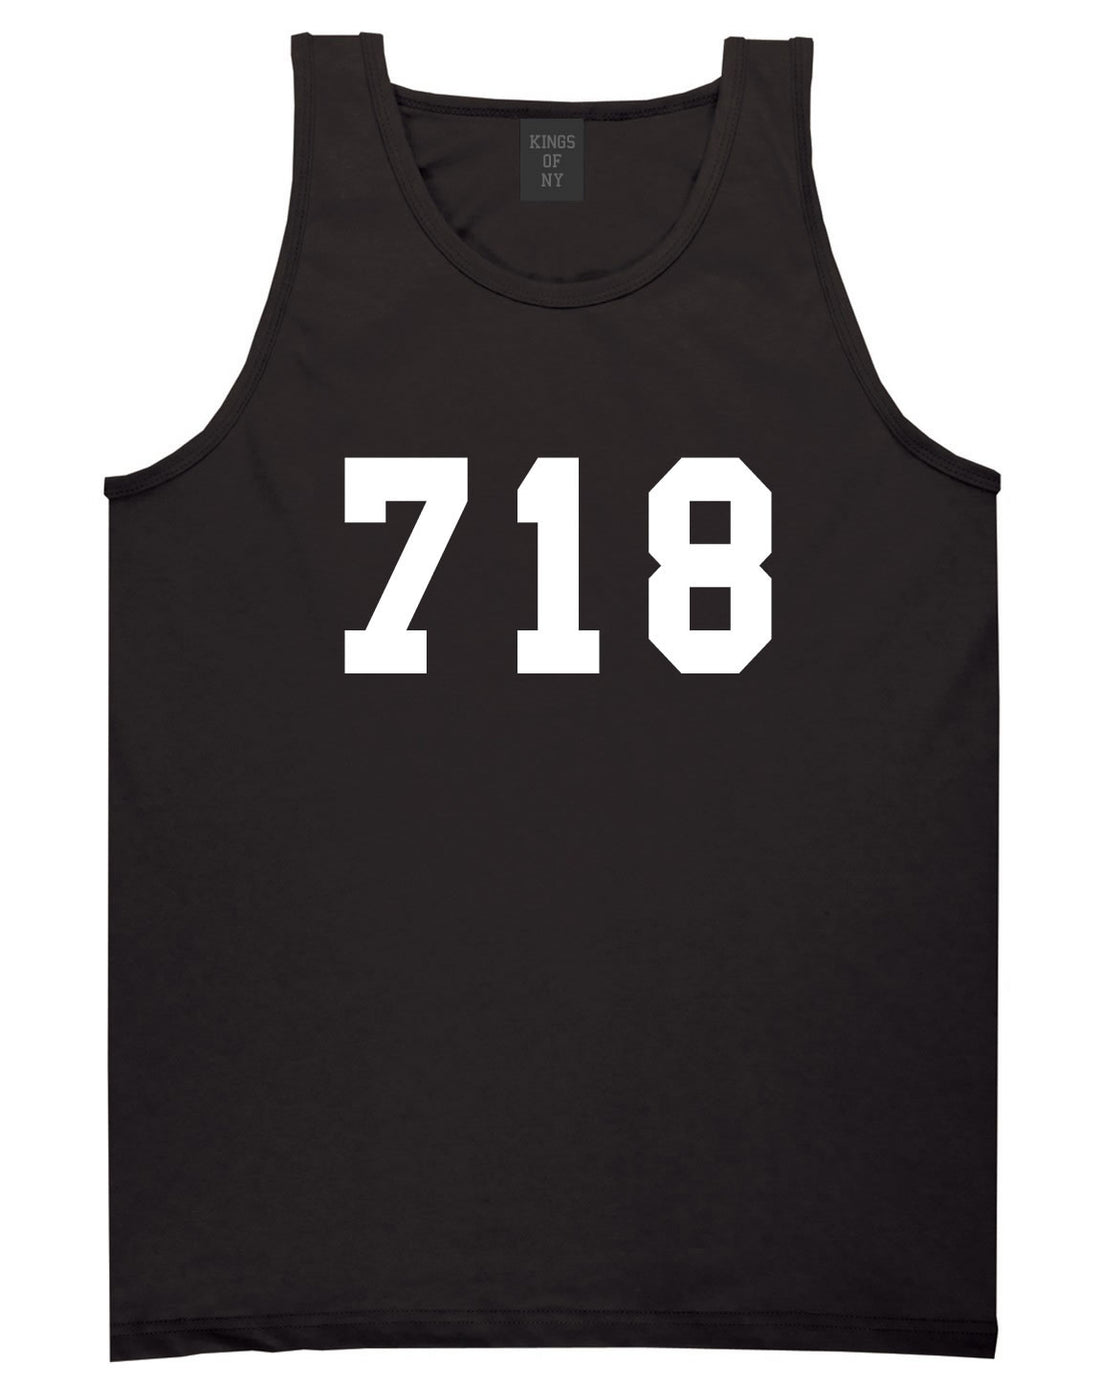 718 New York Area Code Tank Top in Black By Kings Of NY